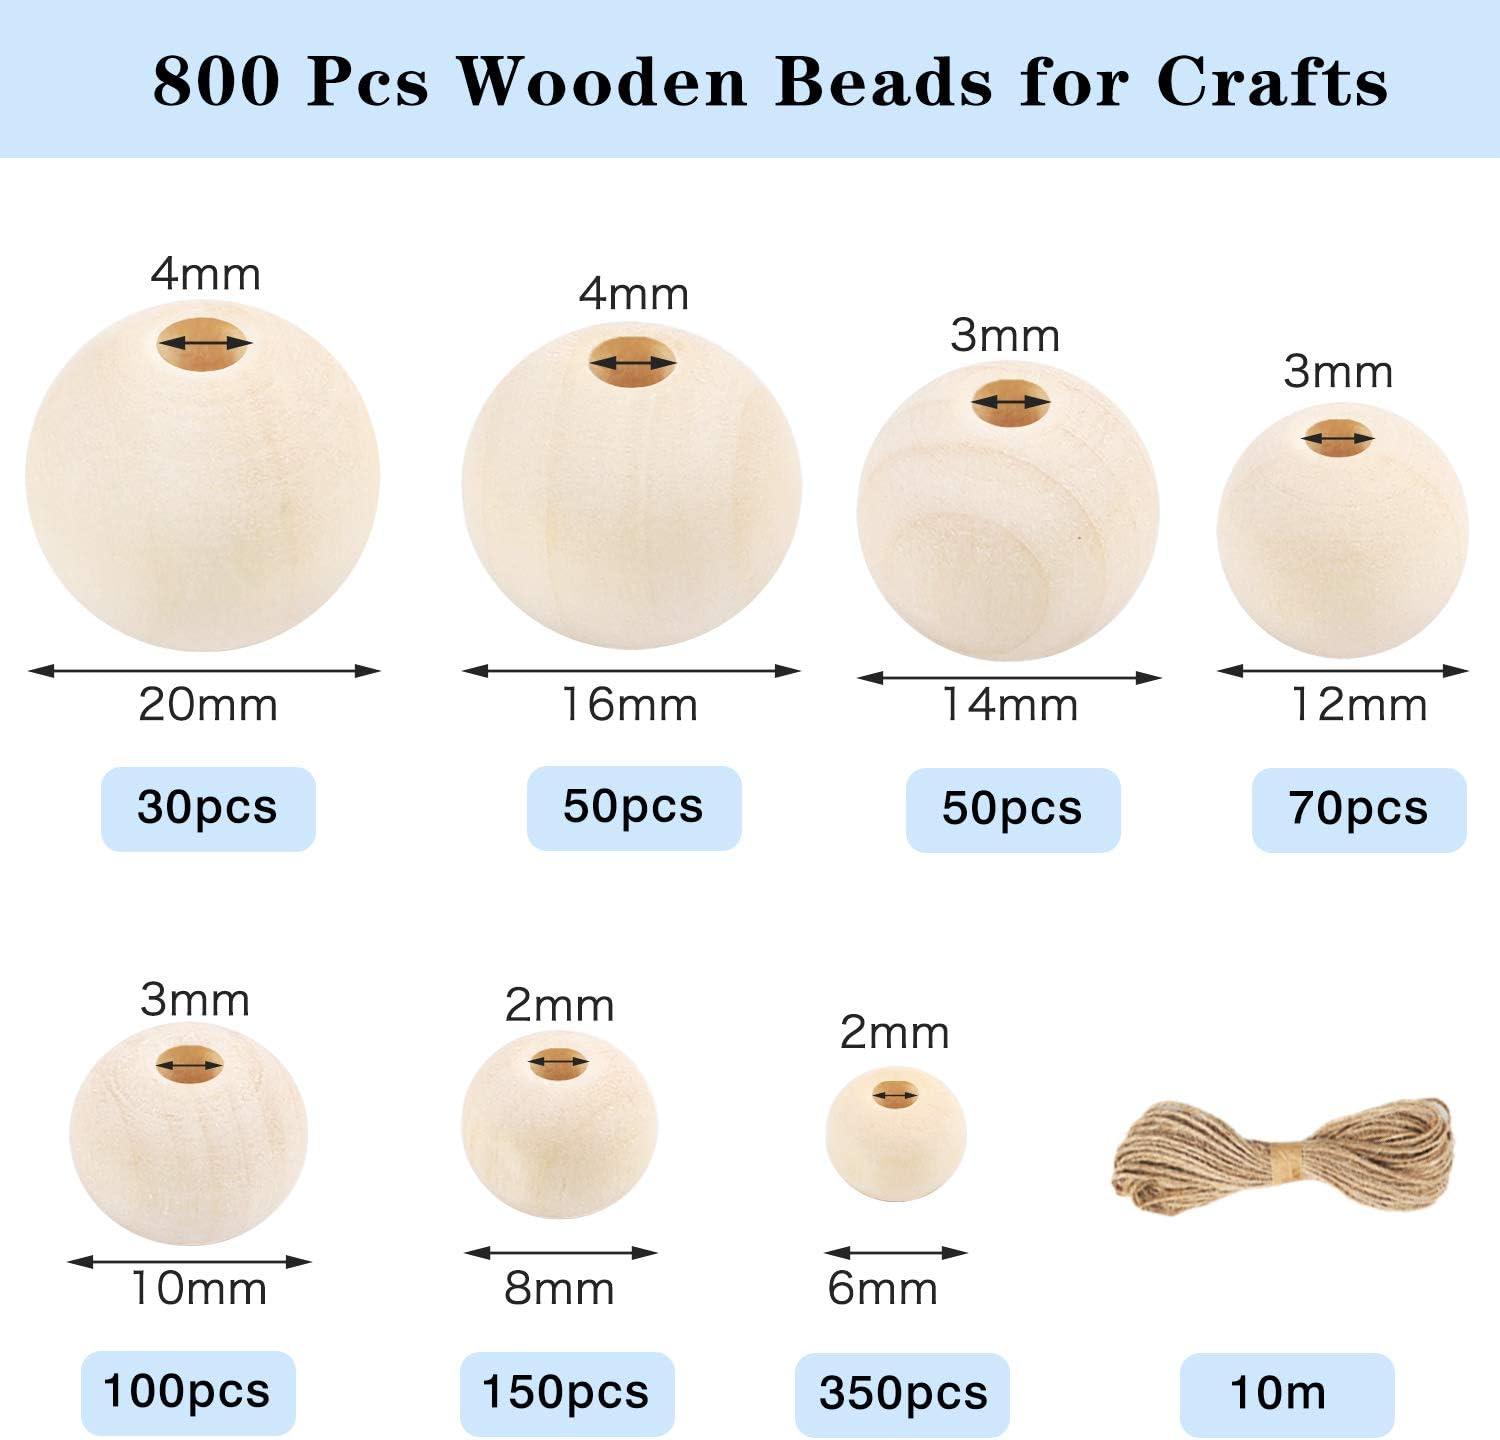 UOONY 800Pcs Wooden Beads for Crafts 7 Sizes Unfinished Natural Wood Beads  Woode